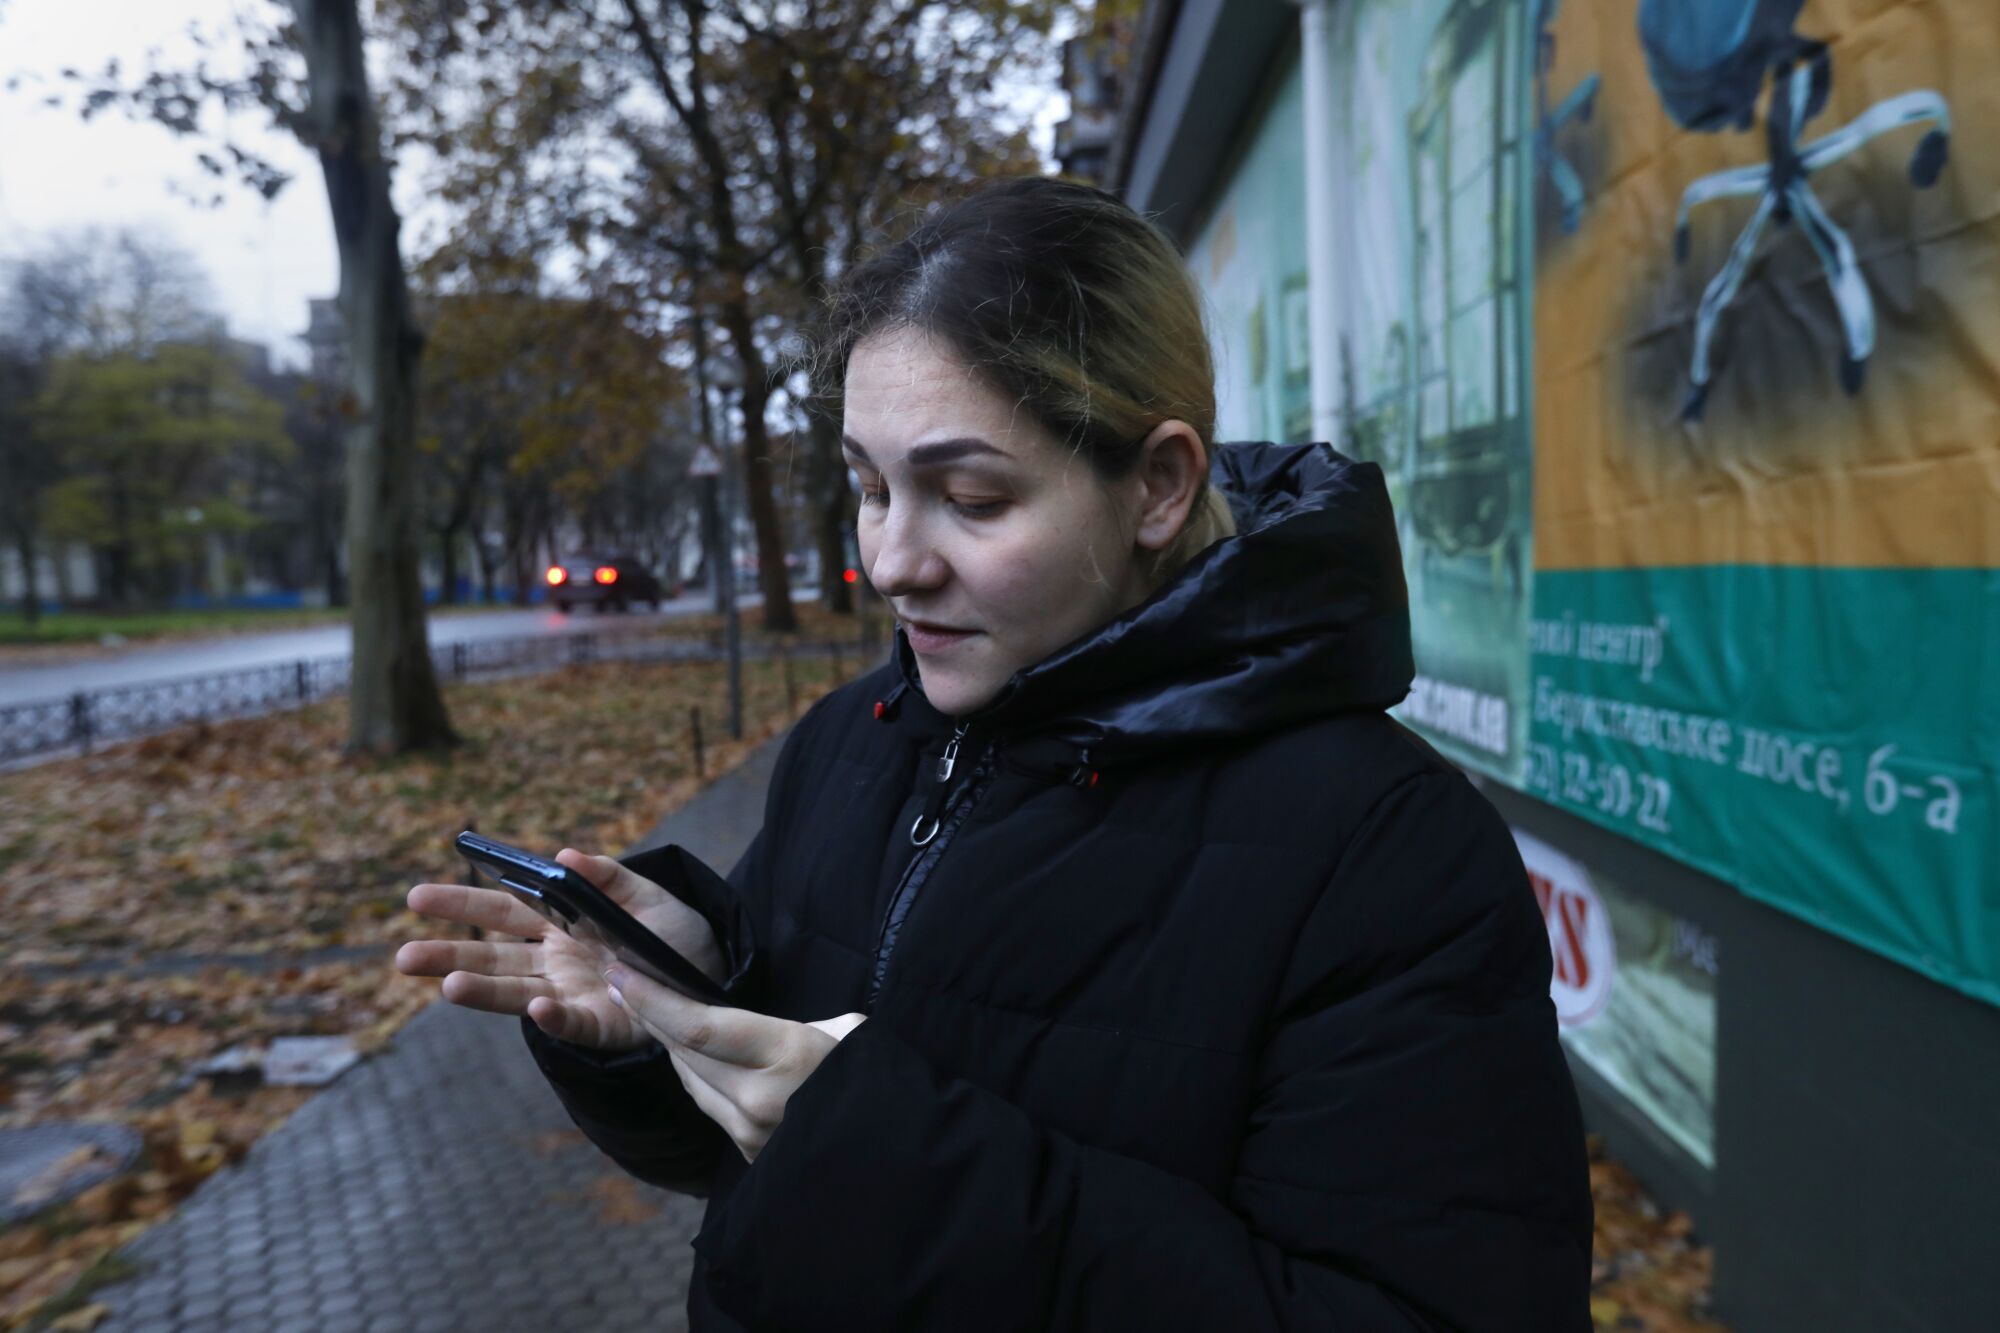 A dark haired woman wearing a black hooded jacket looks at her phone along a tree lined street 